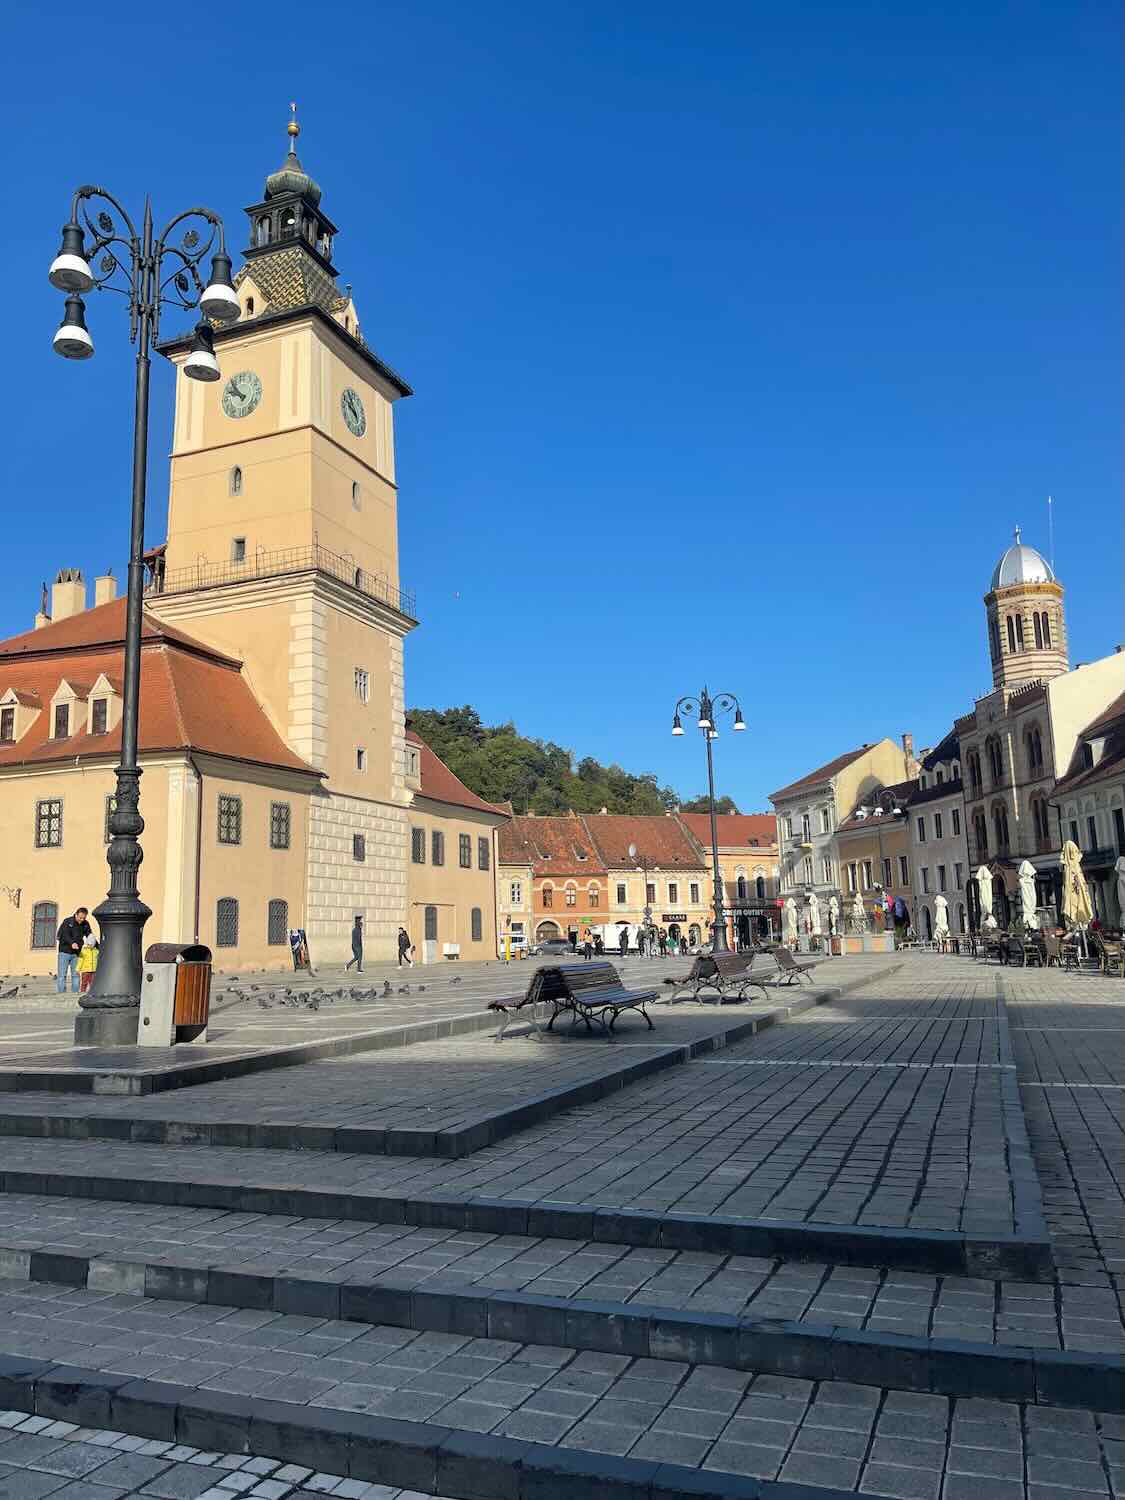 Bright, sunny day over Brasov's town square, showcasing the old town's charming architecture with the Black Church's tower and ornate street lamps, all against a vivid blue sky.